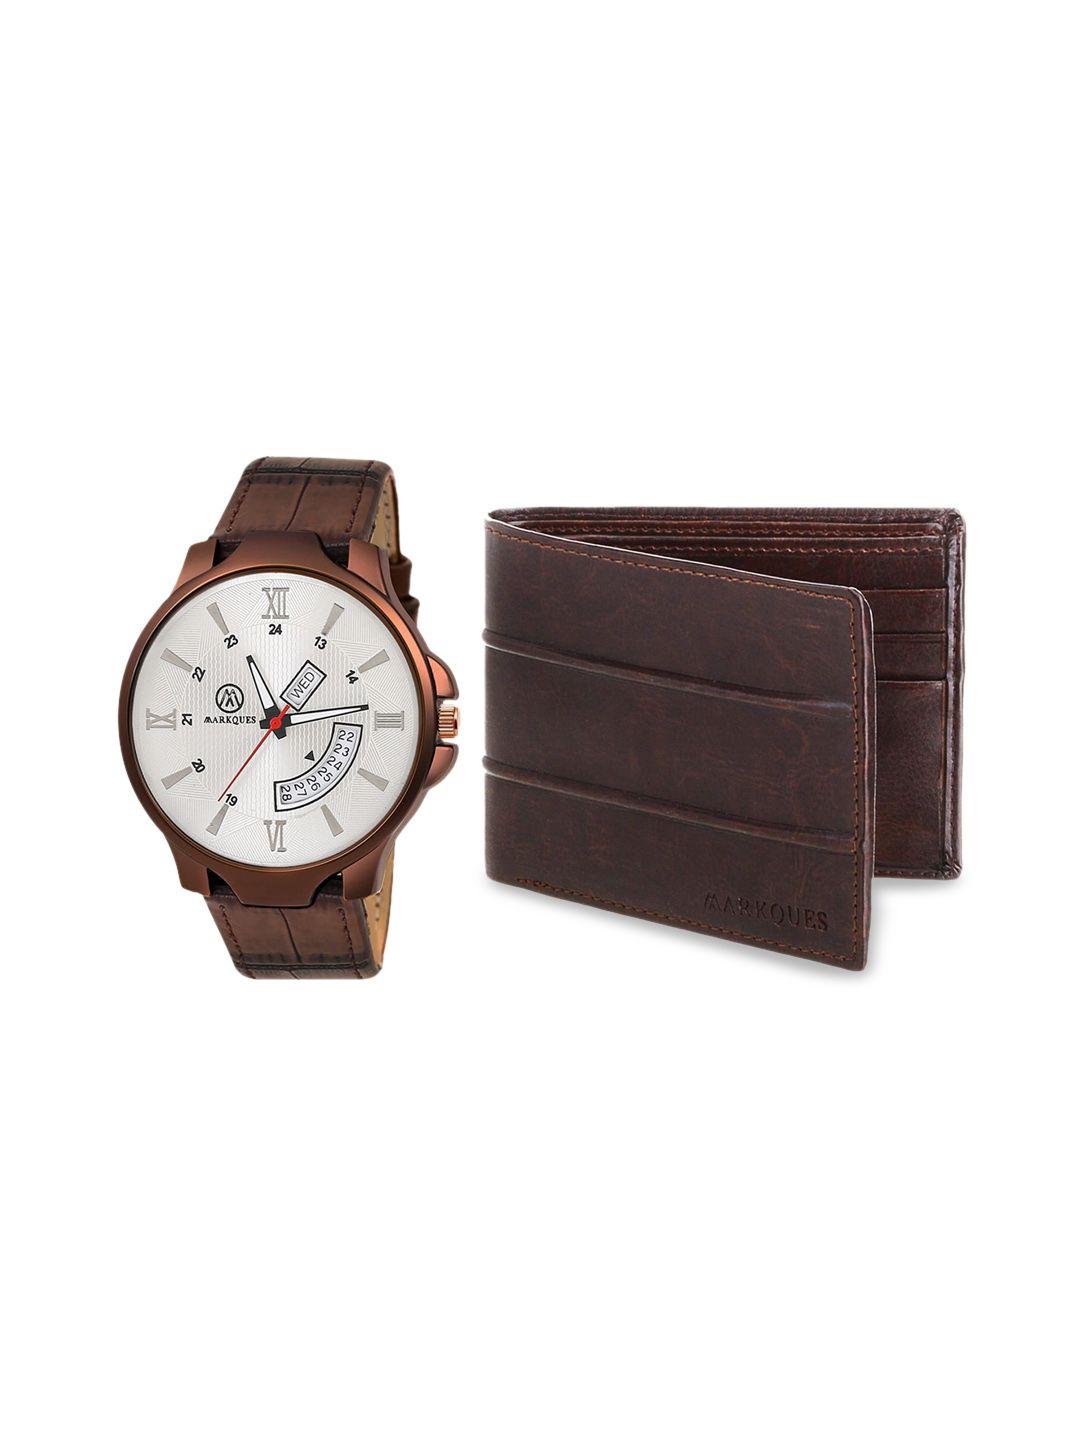 markques men brown watch and wallet combo accessory gift set